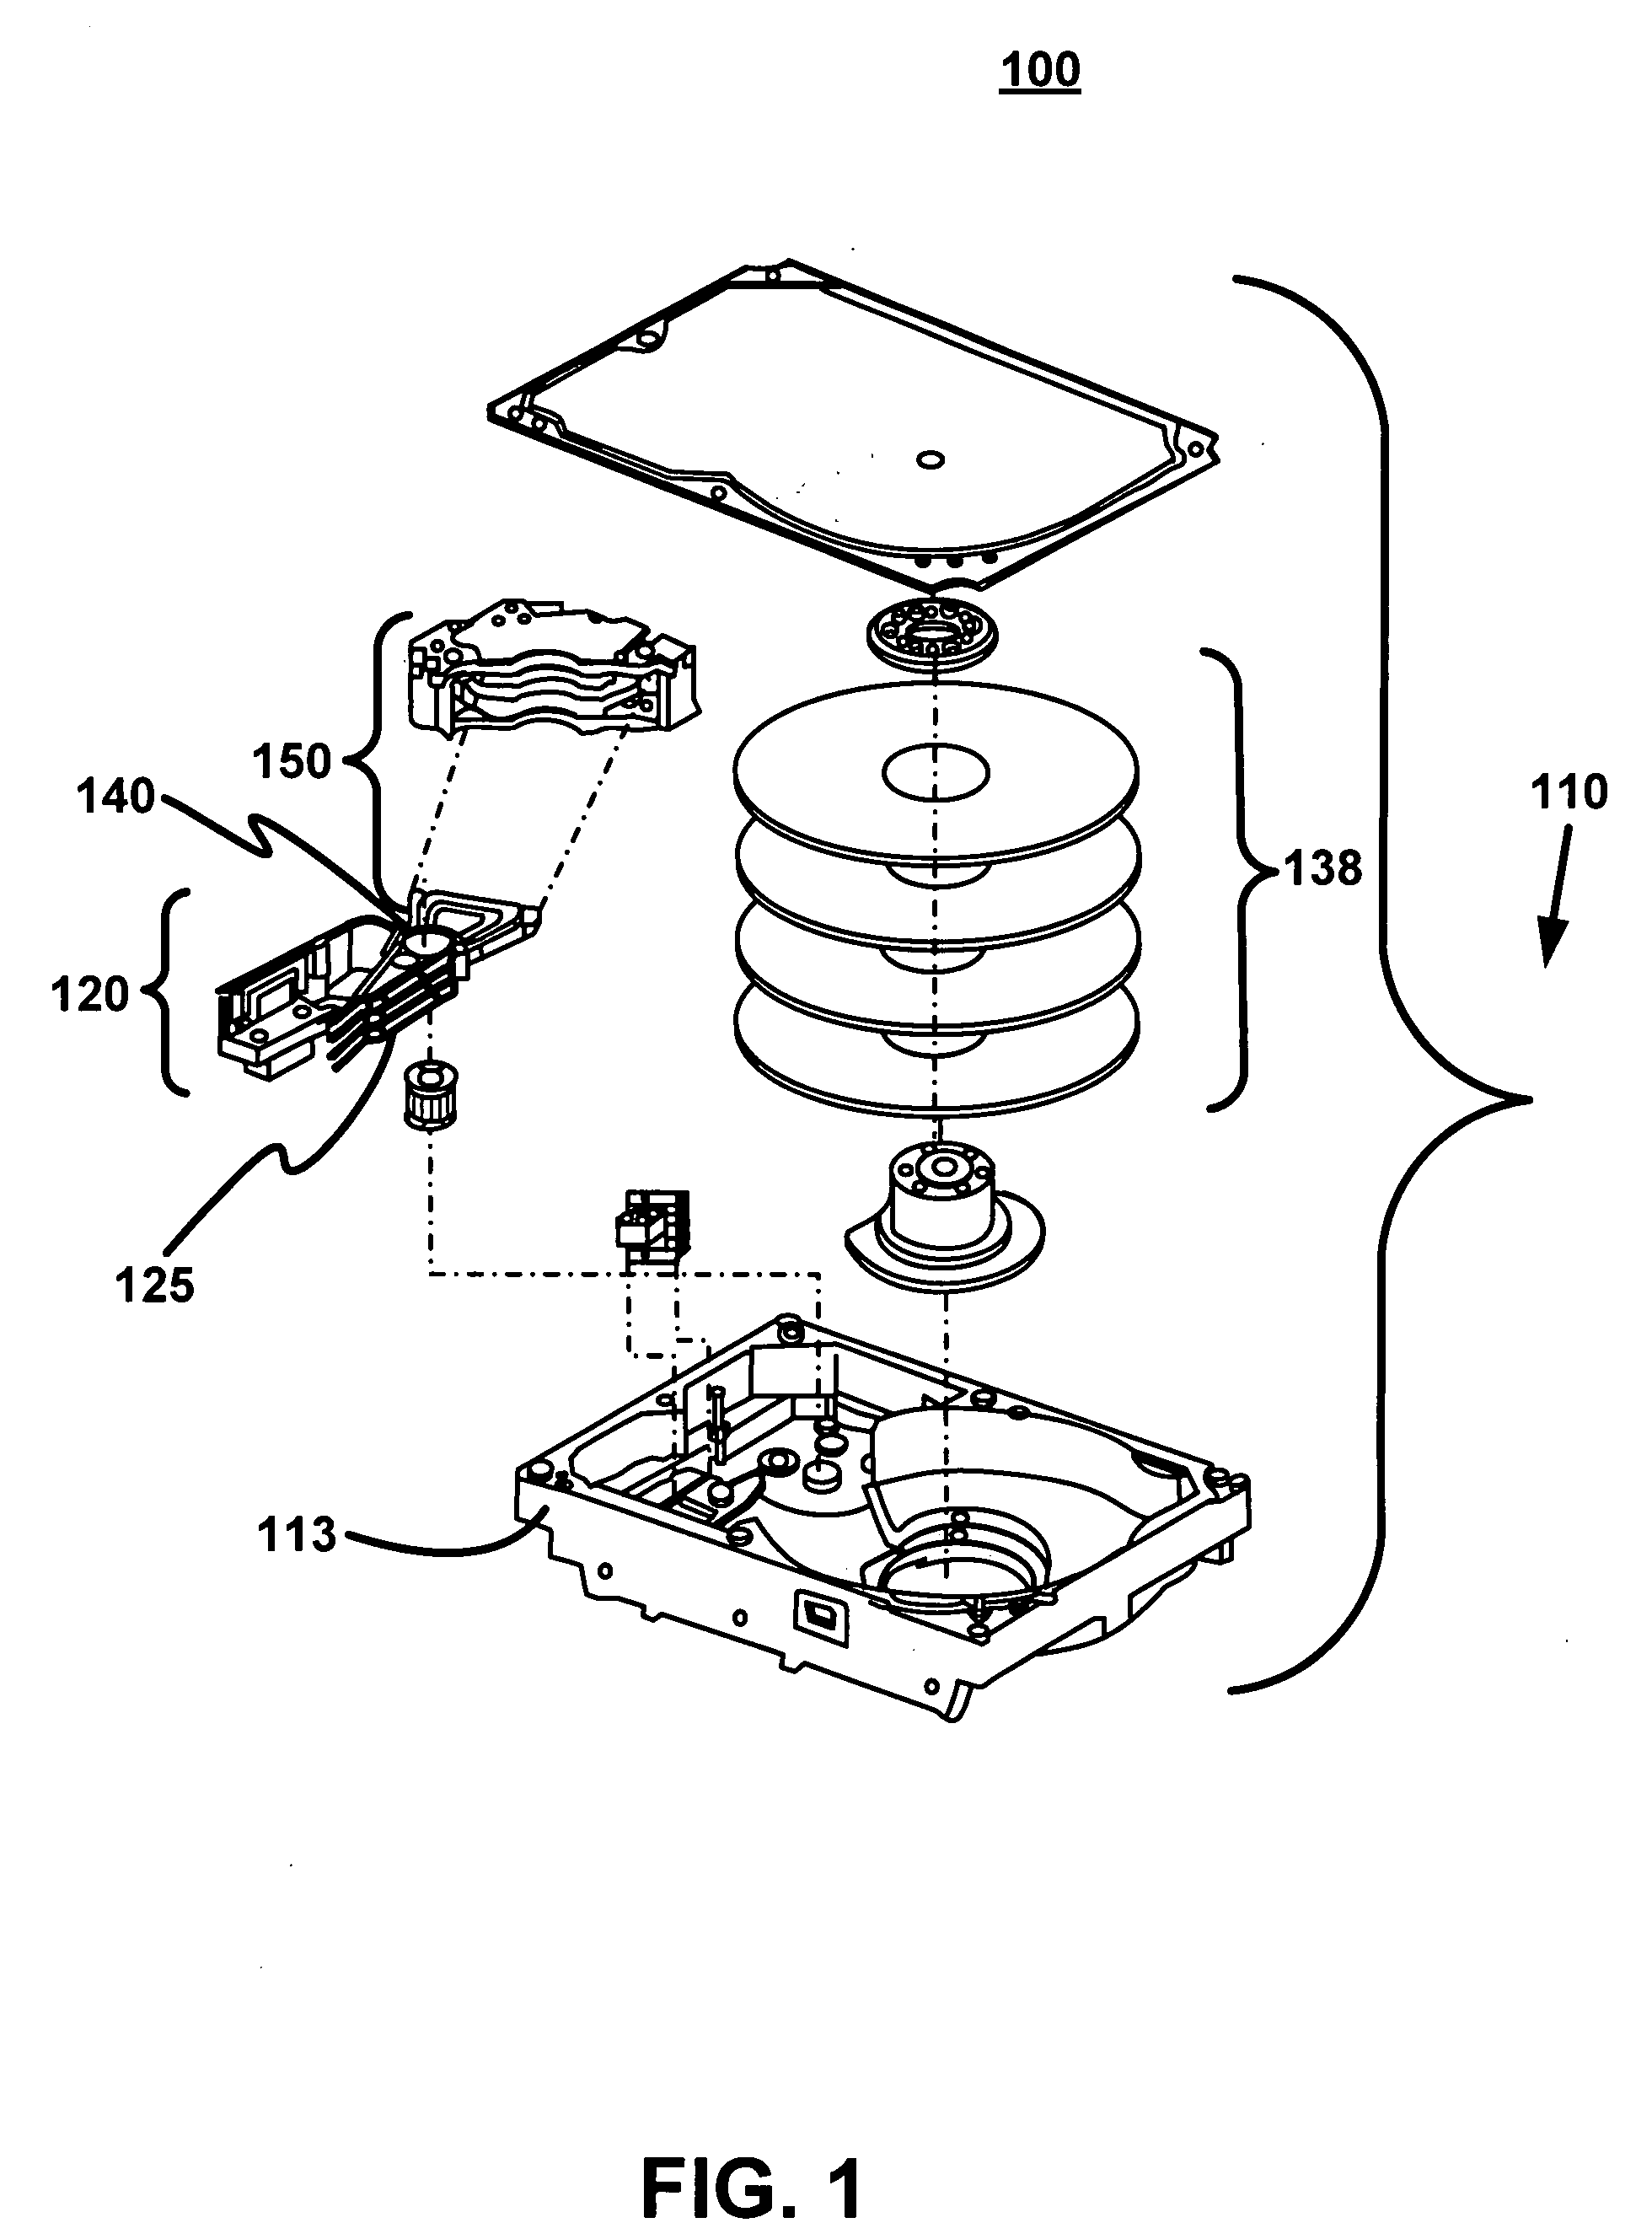 System and method for changing resonant frequency in hard disk drive components